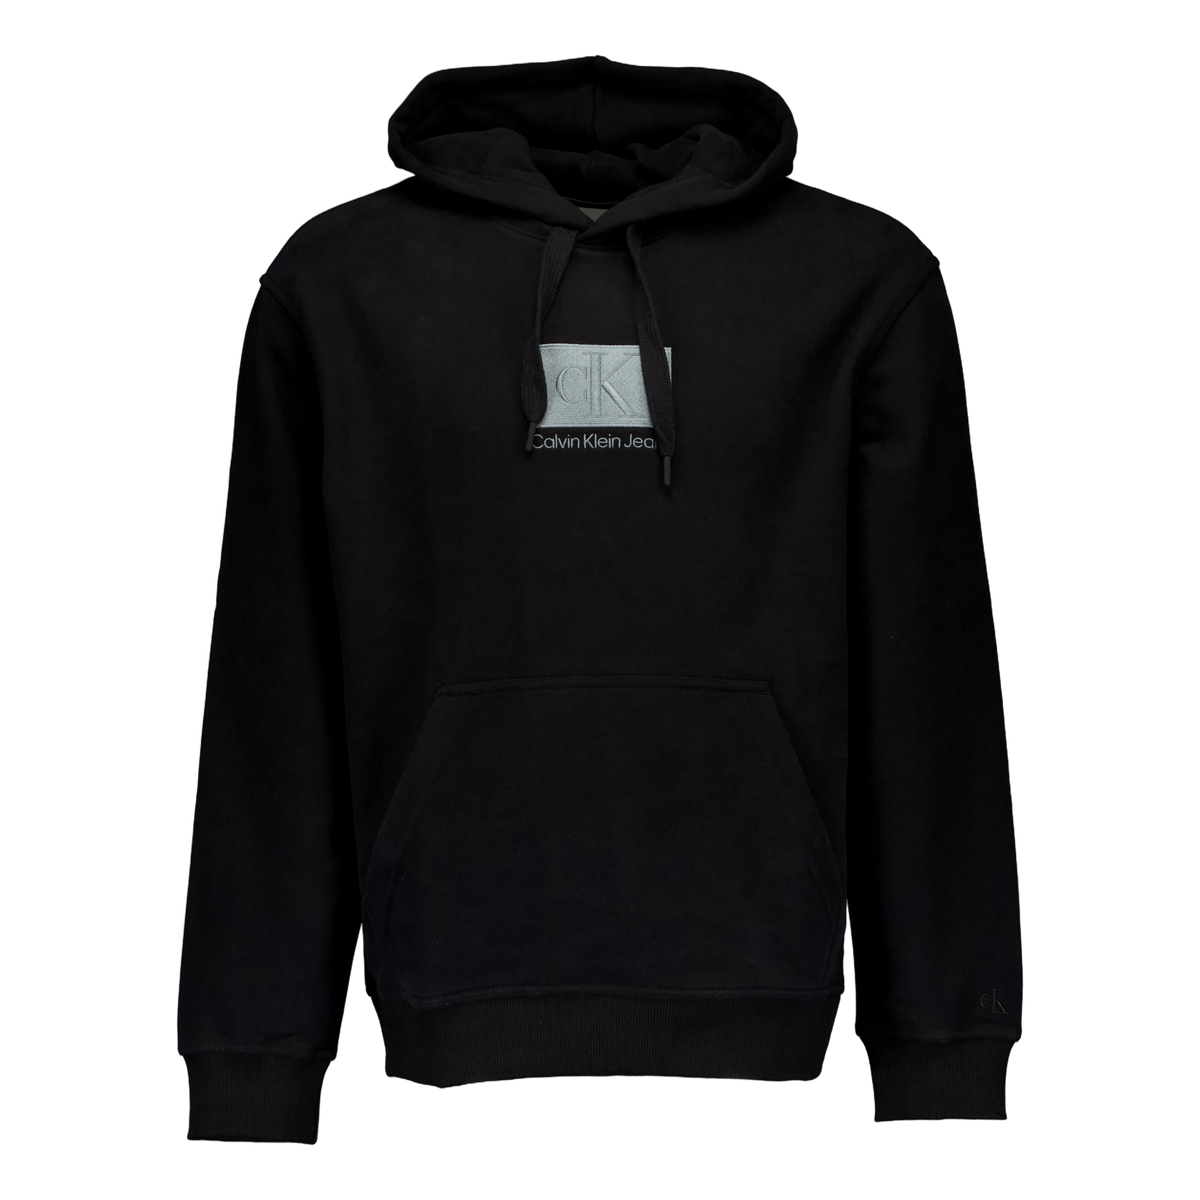 Embroidery Patch Hoodie Ck